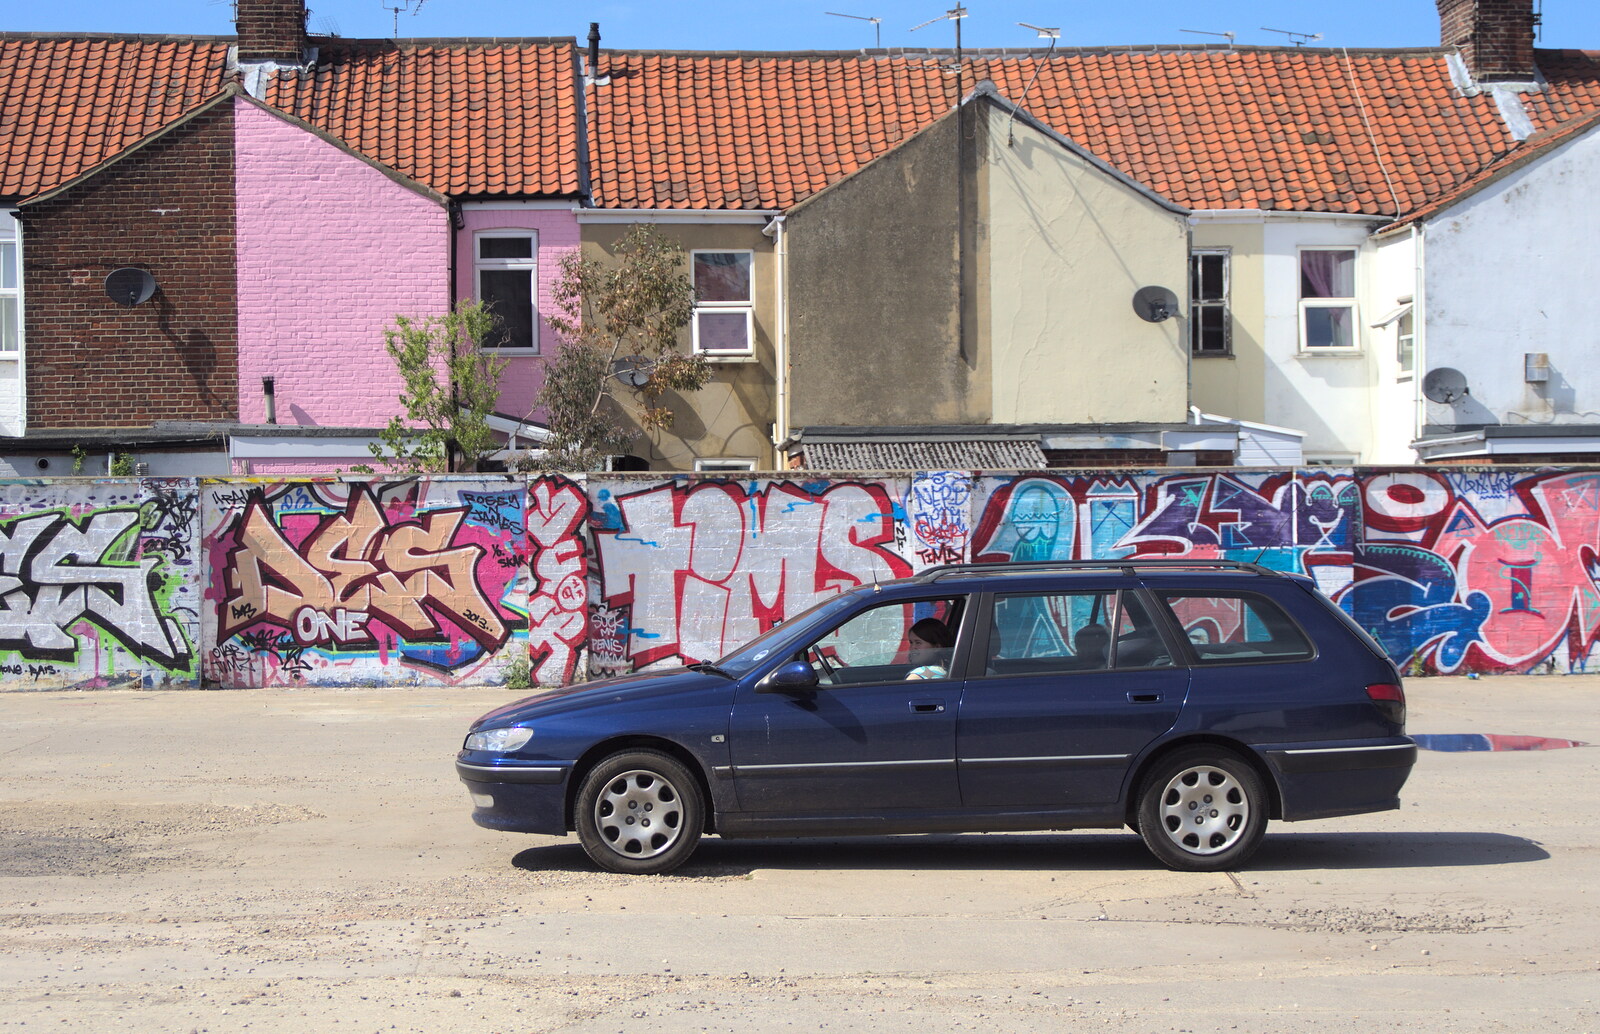 The car sits by Graffiti Wall from The Dereliction of HMSO, Botolph Street, Norwich - 26th May 2013